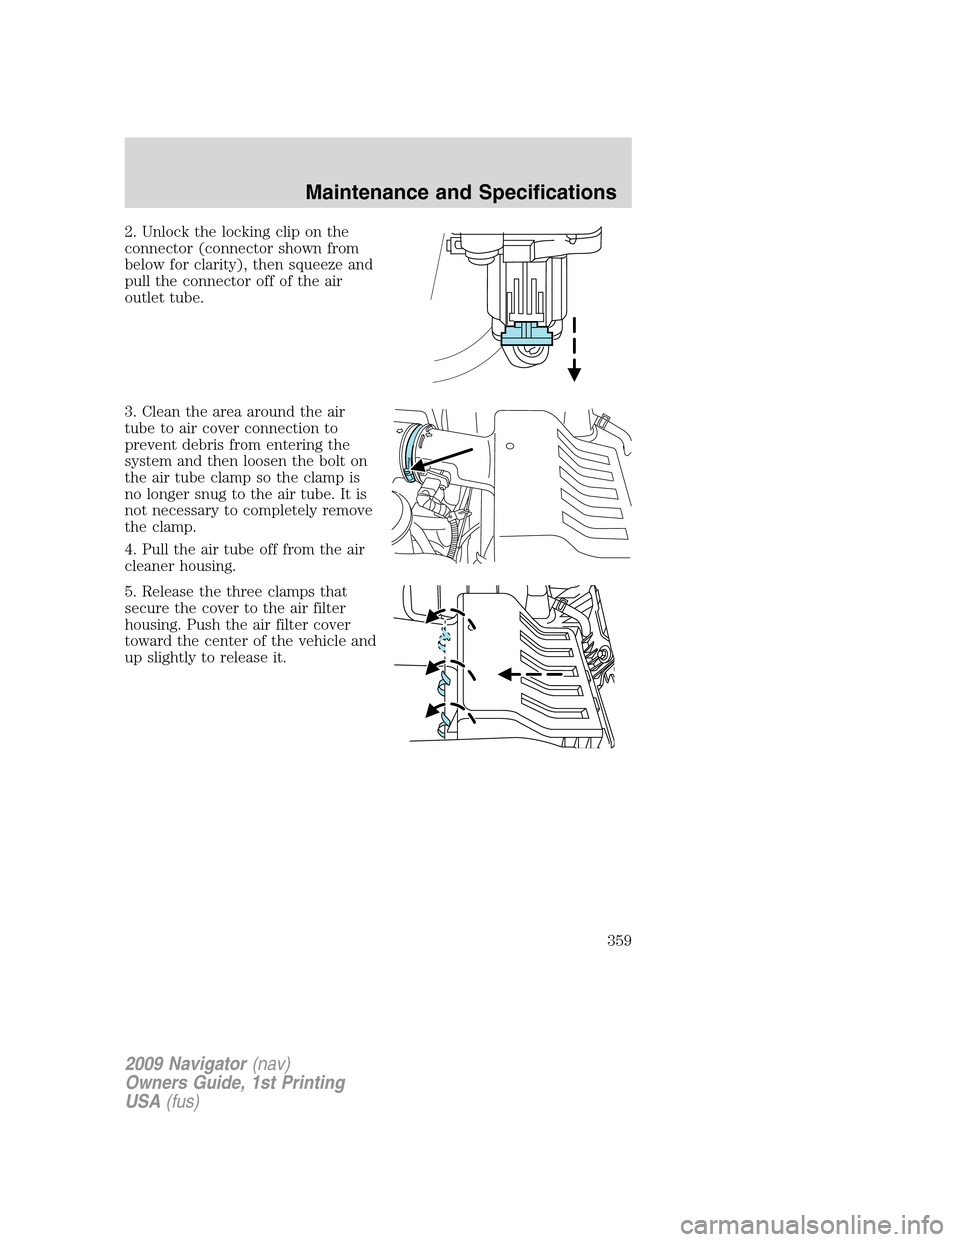 LINCOLN NAVIGATOR 2009  Owners Manual 2. Unlock the locking clip on the
connector (connector shown from
below for clarity), then squeeze and
pull the connector off of the air
outlet tube.
3. Clean the area around the air
tube to air cover